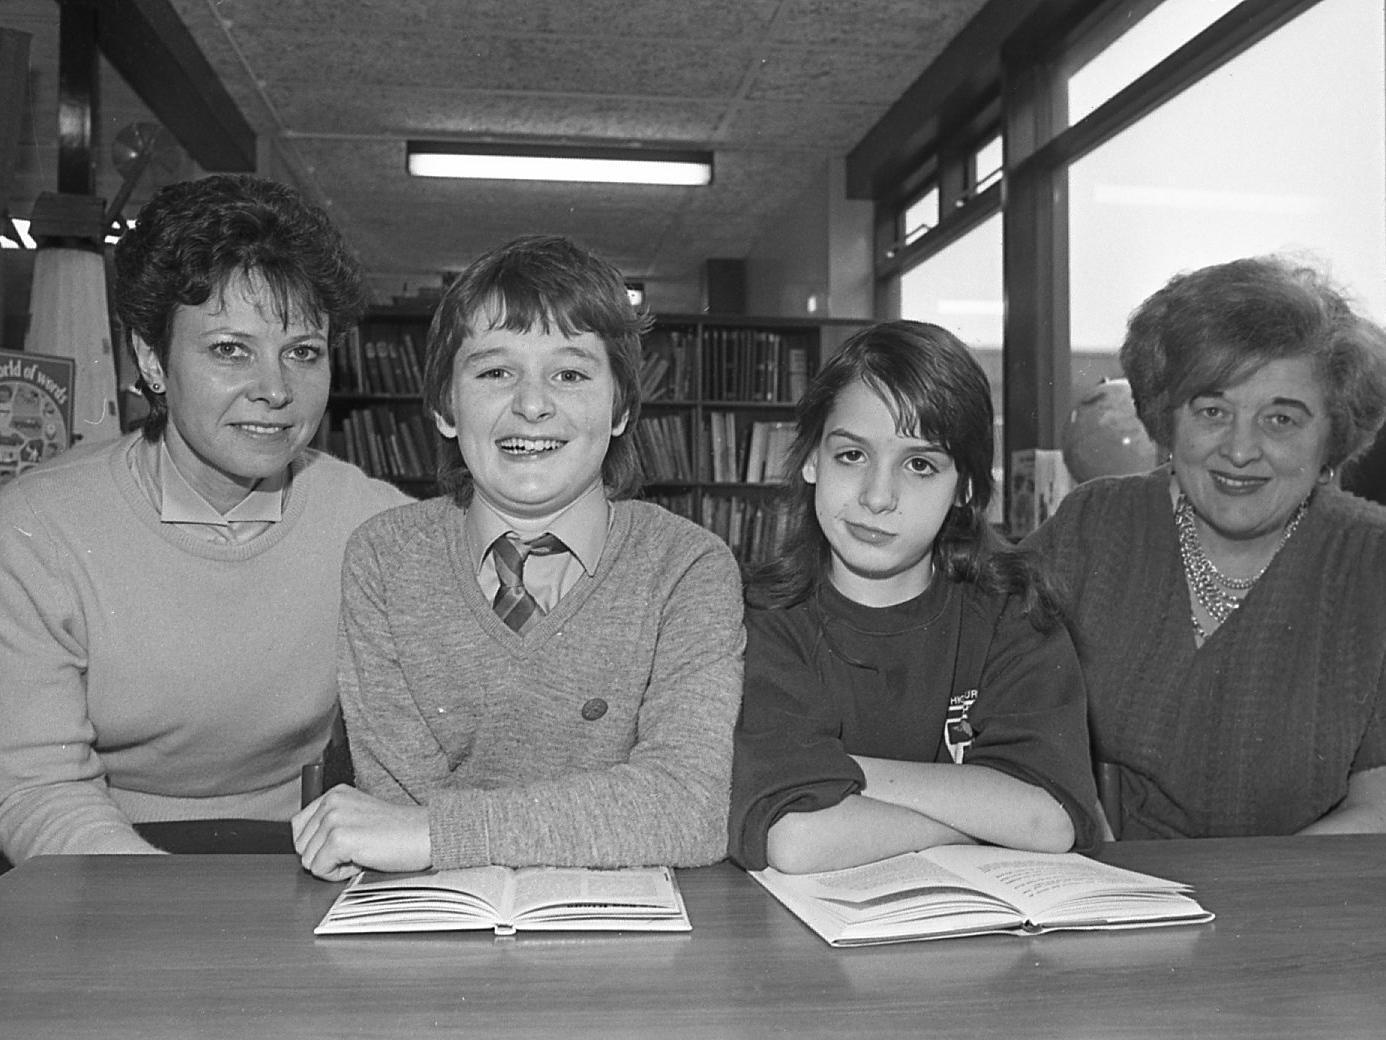 Blackpool schoolboy Paul Smith was born without enough oxygen 12 years ago. But despite a life handicapped by cerebral palsy he has overcome his difficulties and in turn has collected an award as a Child of Achievement. Another pupil at Highfurlong Special School in Blackpool, Anna Garcia, 10, also collected an award. They are pictured above with their teachers Vivienne Beckwith and Shirley Milner